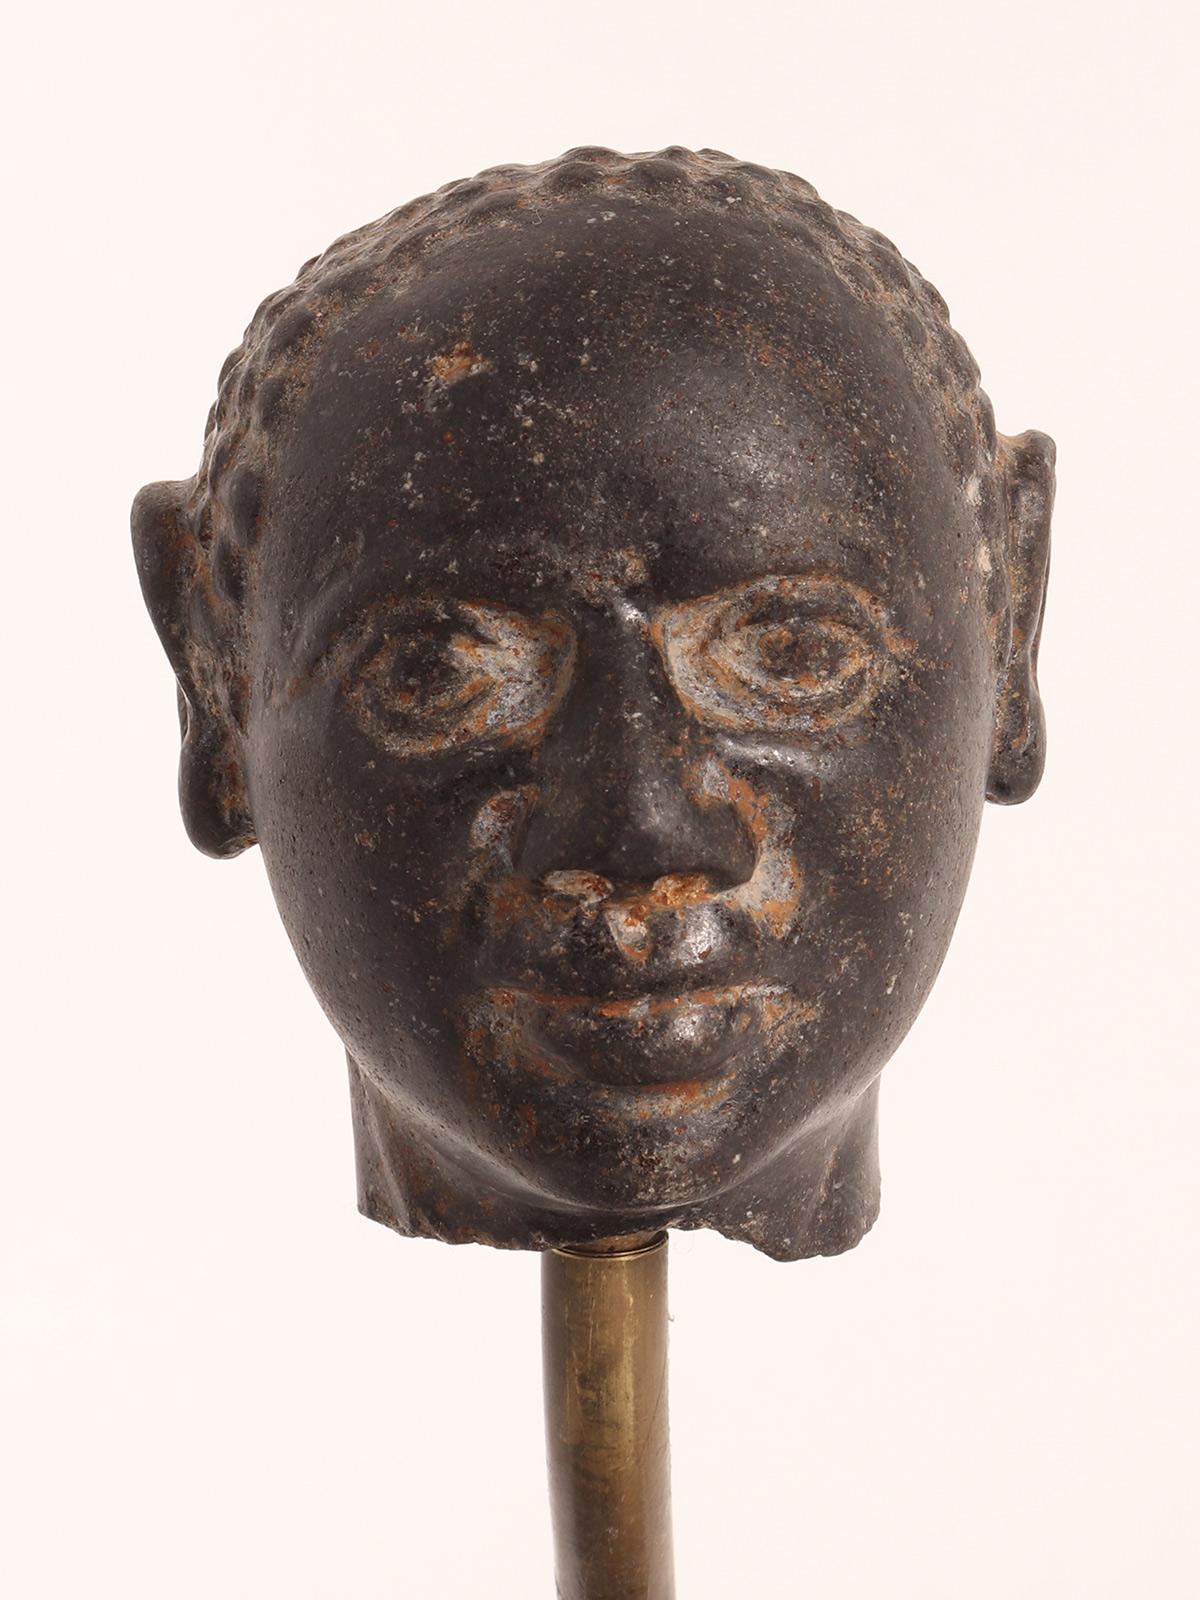 Sculpture depicting a man head made out of black granite, mounted on a square iron base with a brass support. Russia early XVIII century.